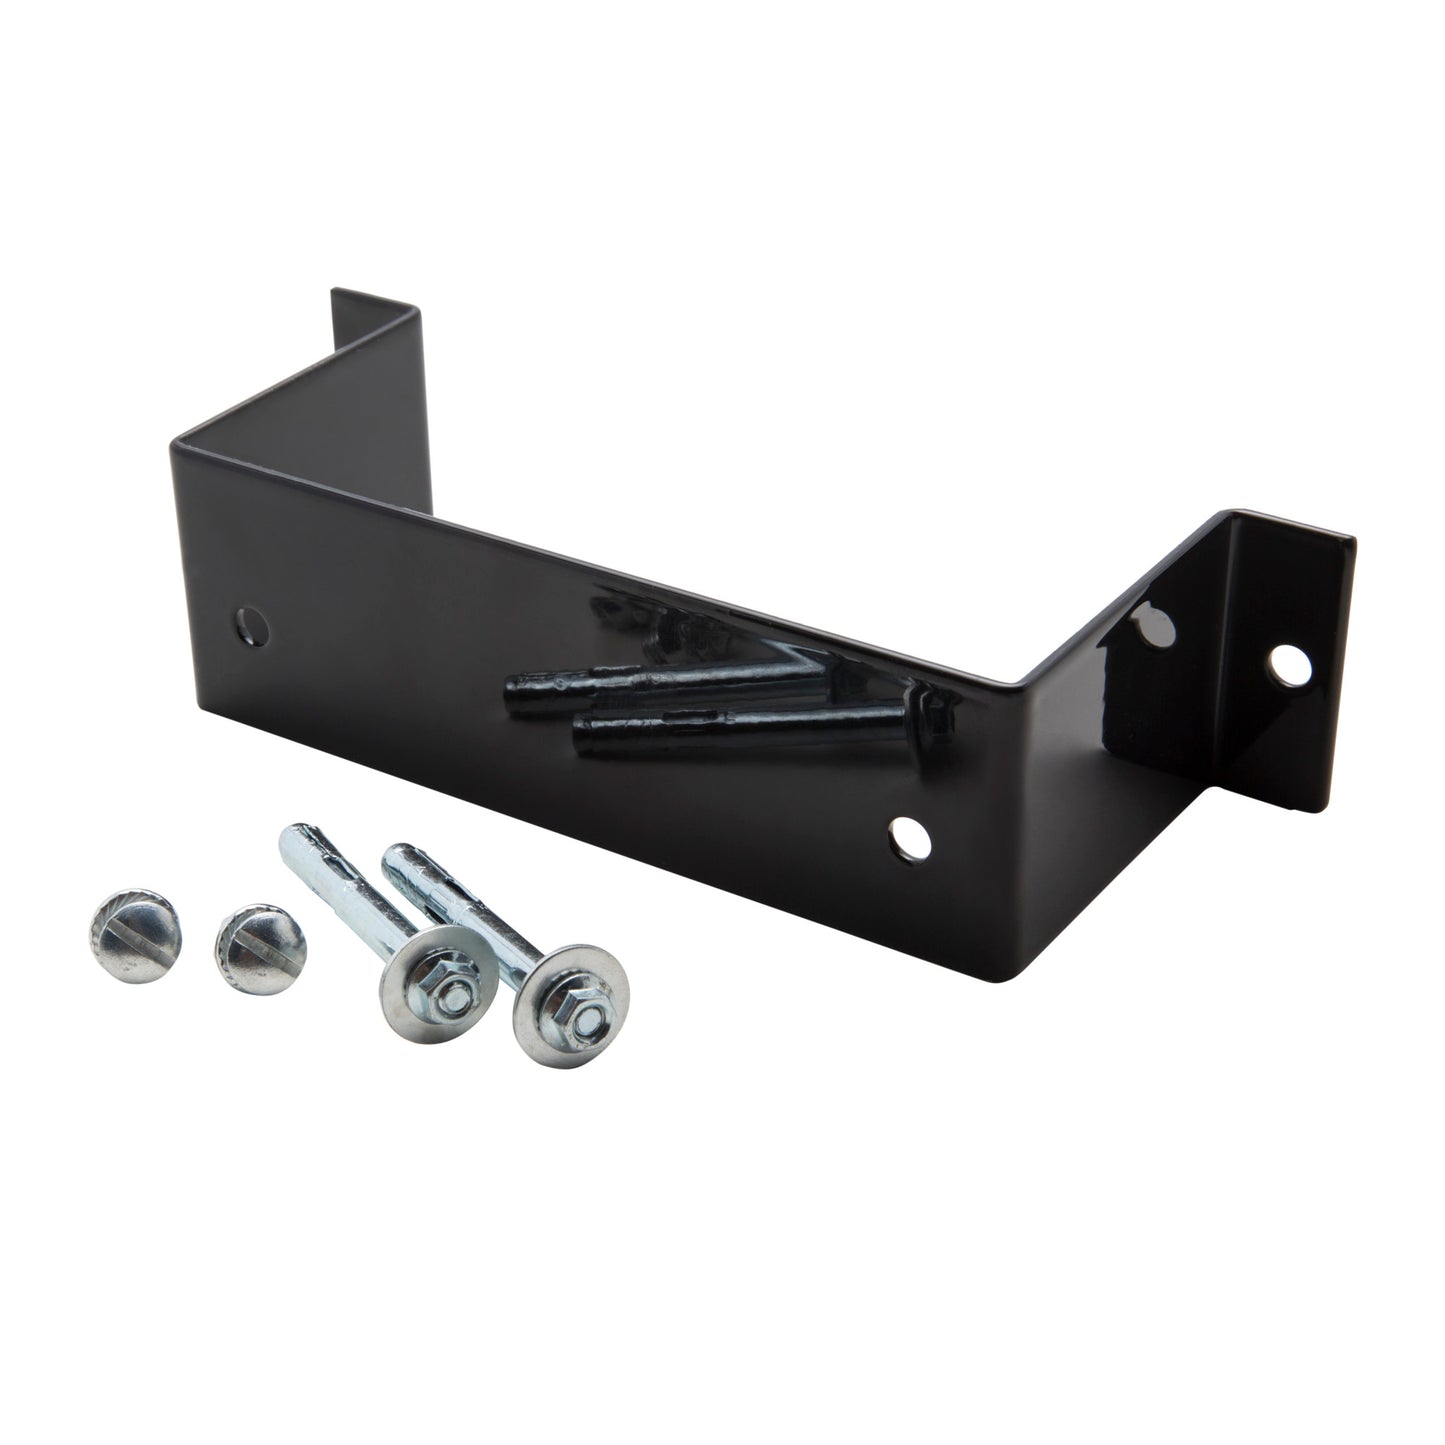 2-Piece Wall Mounted Tool Storage Bracket with Mounting Hardware